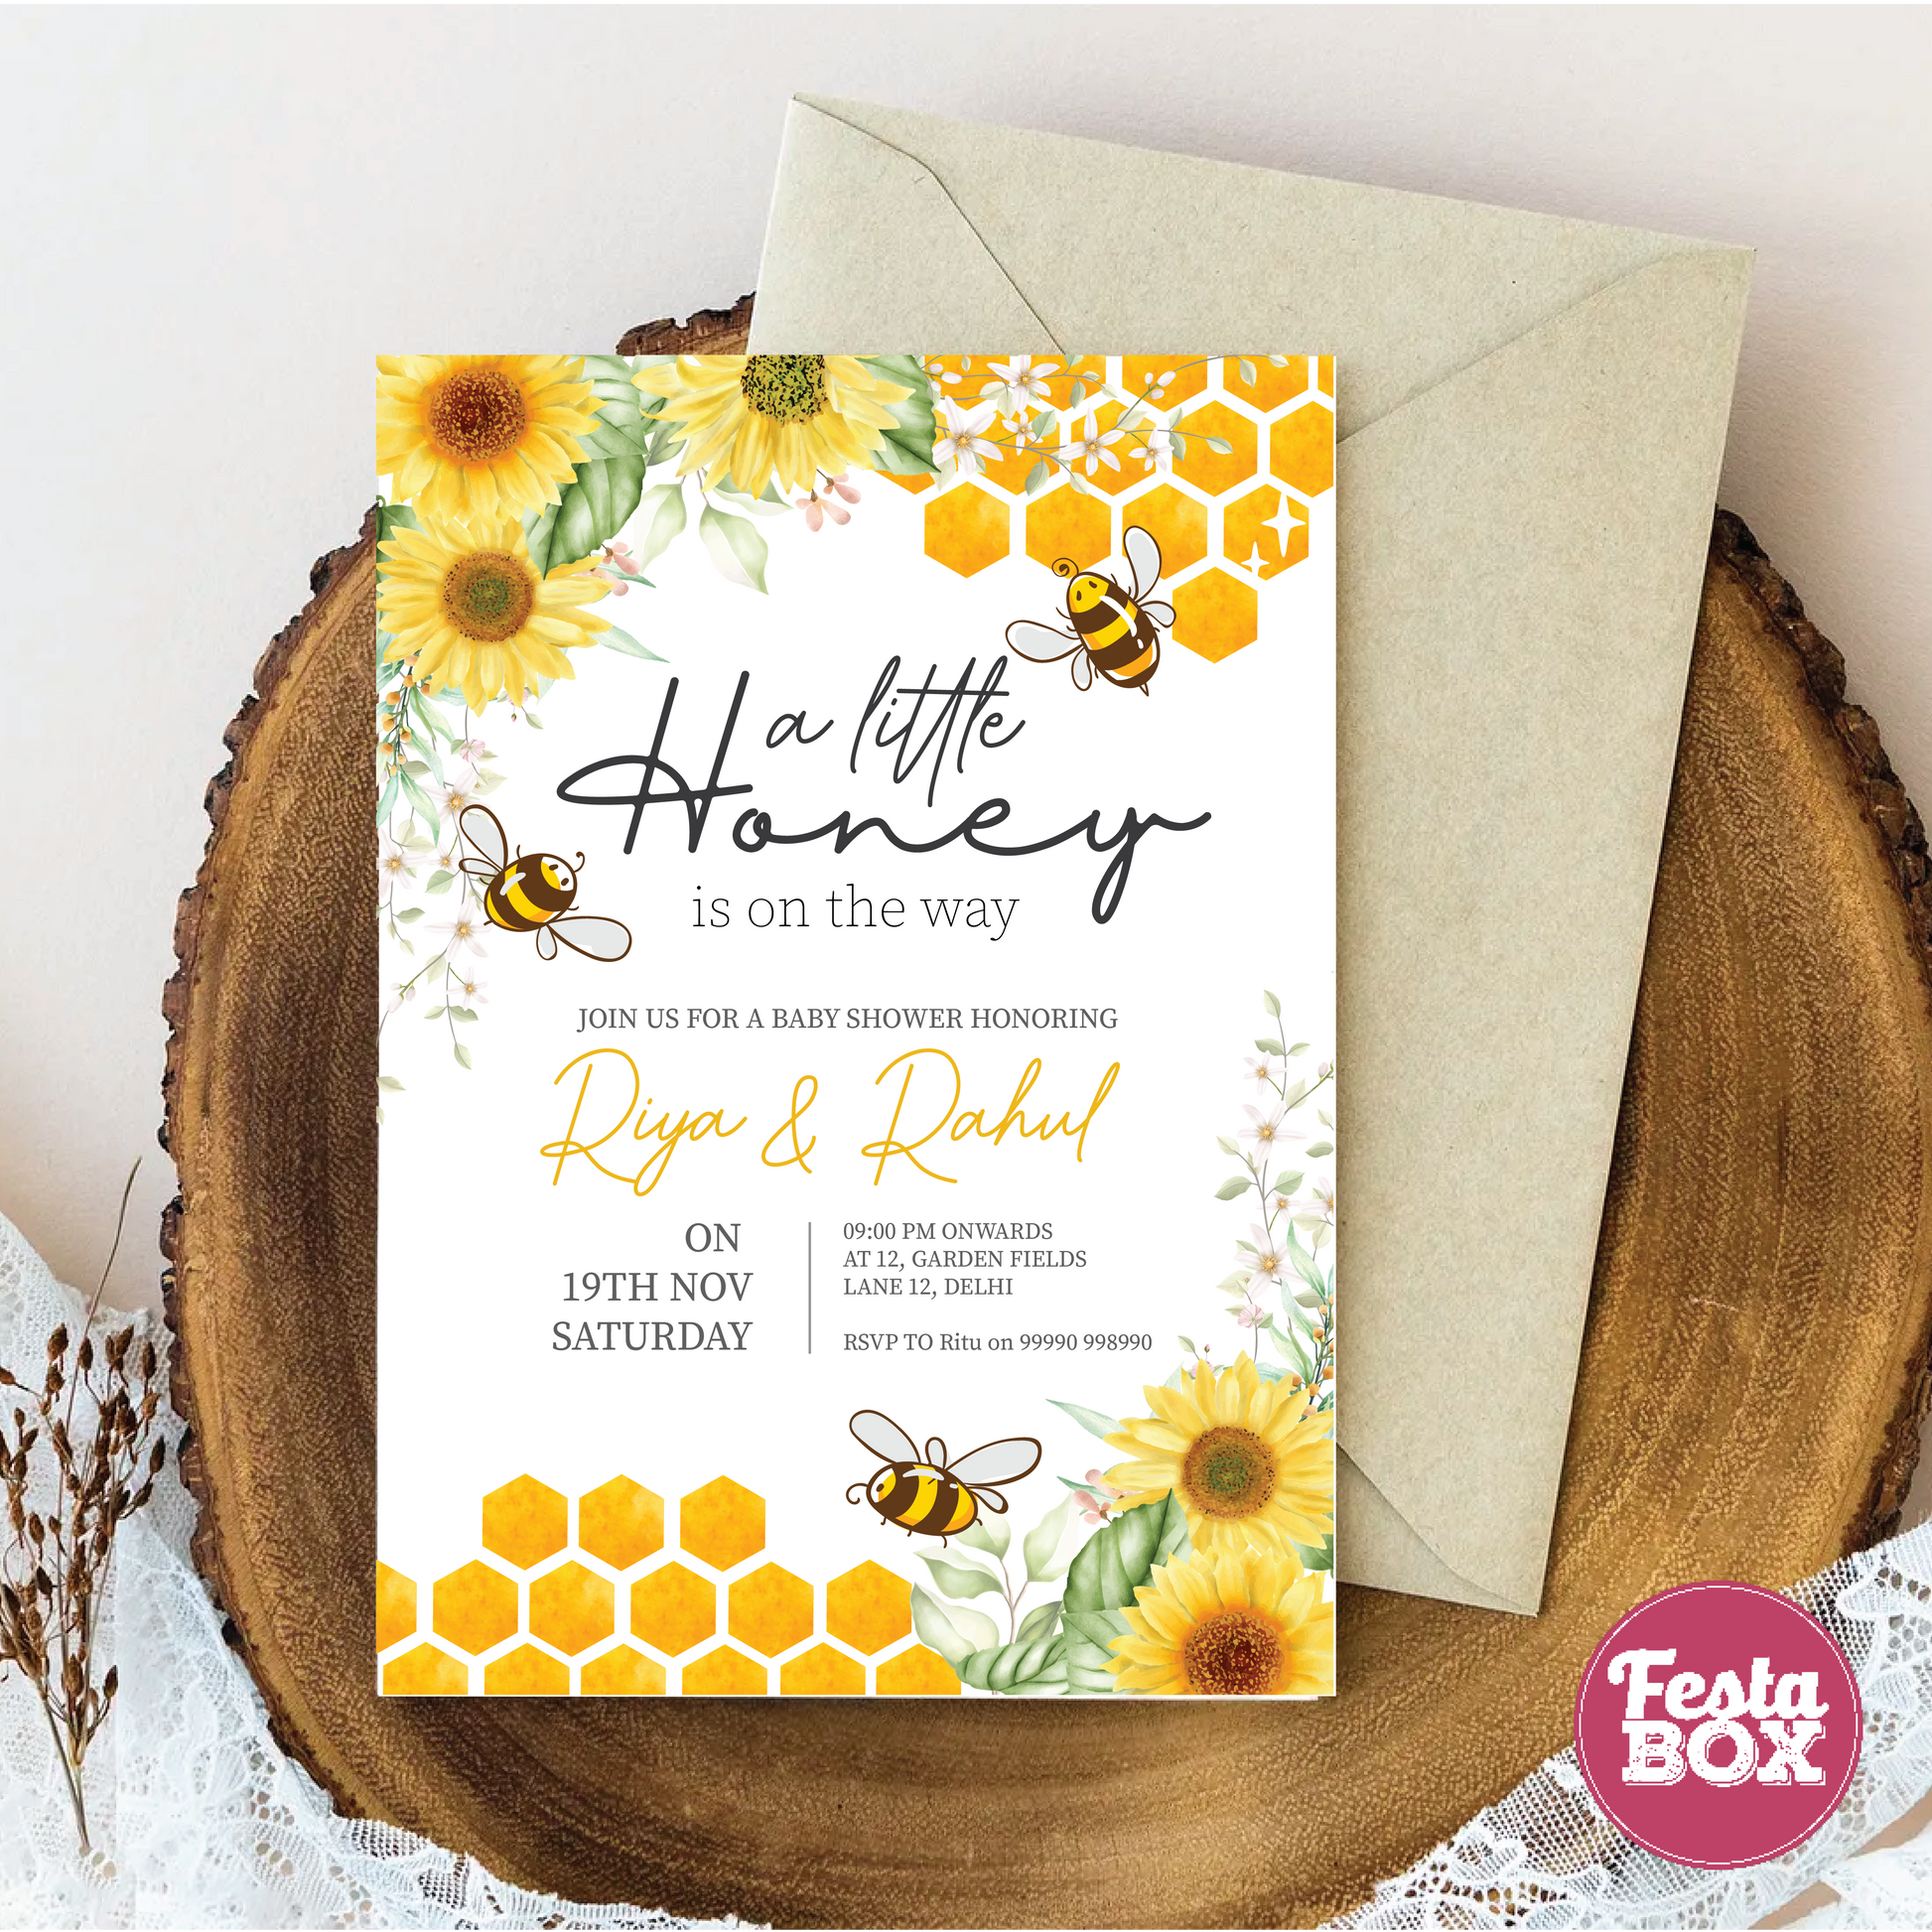 Baby Shower Invitation - Honeybee Collection by Festabox